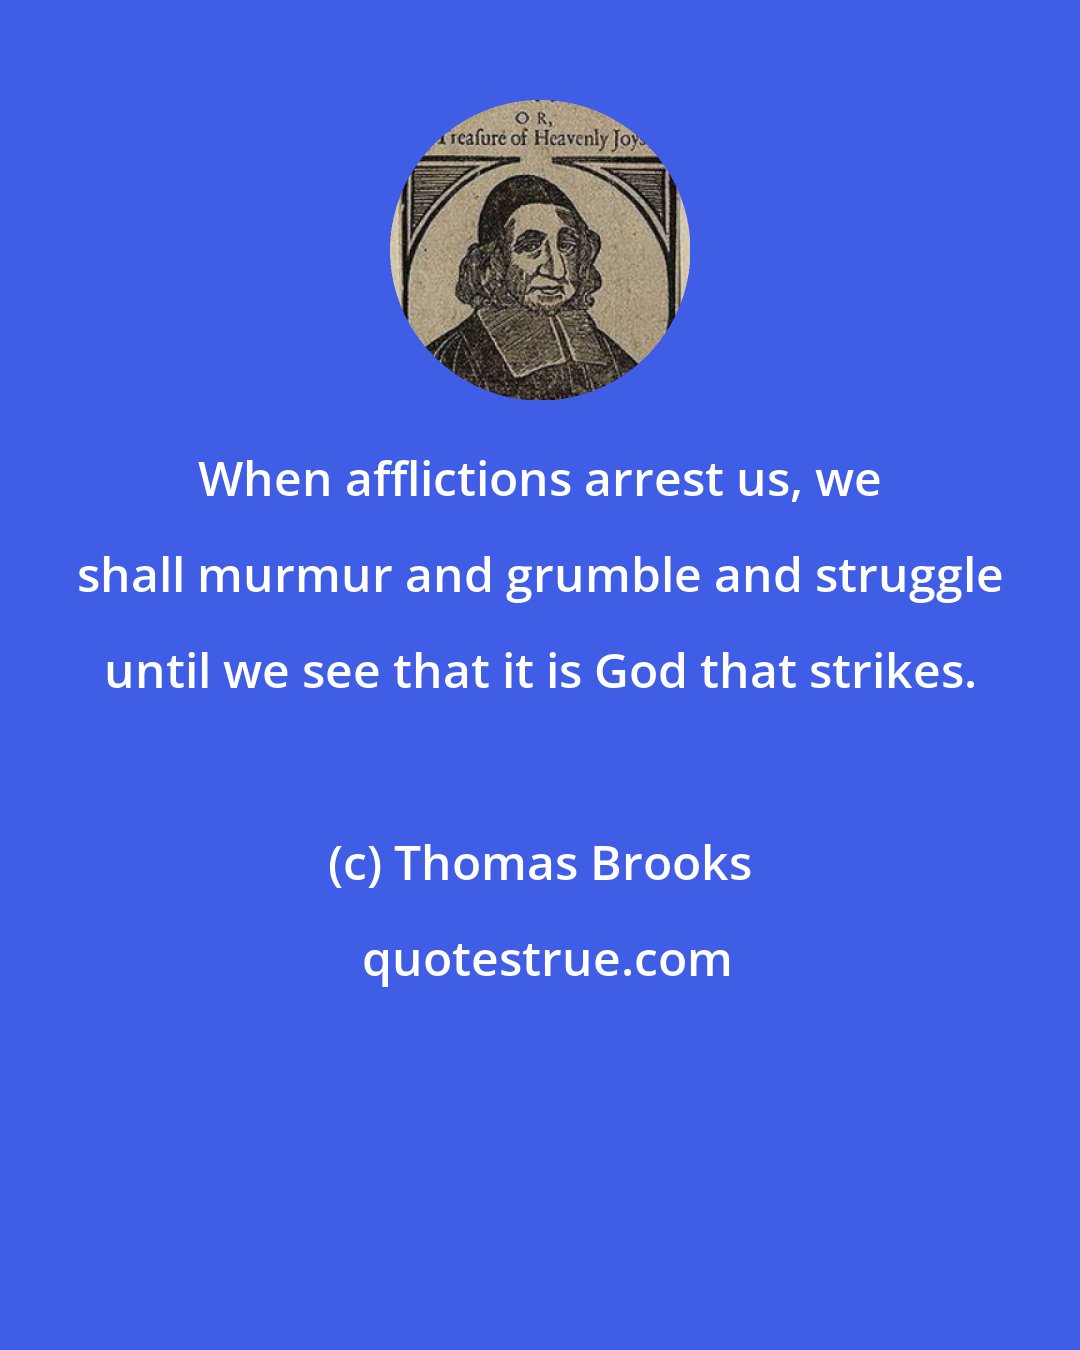 Thomas Brooks: When afflictions arrest us, we shall murmur and grumble and struggle until we see that it is God that strikes.